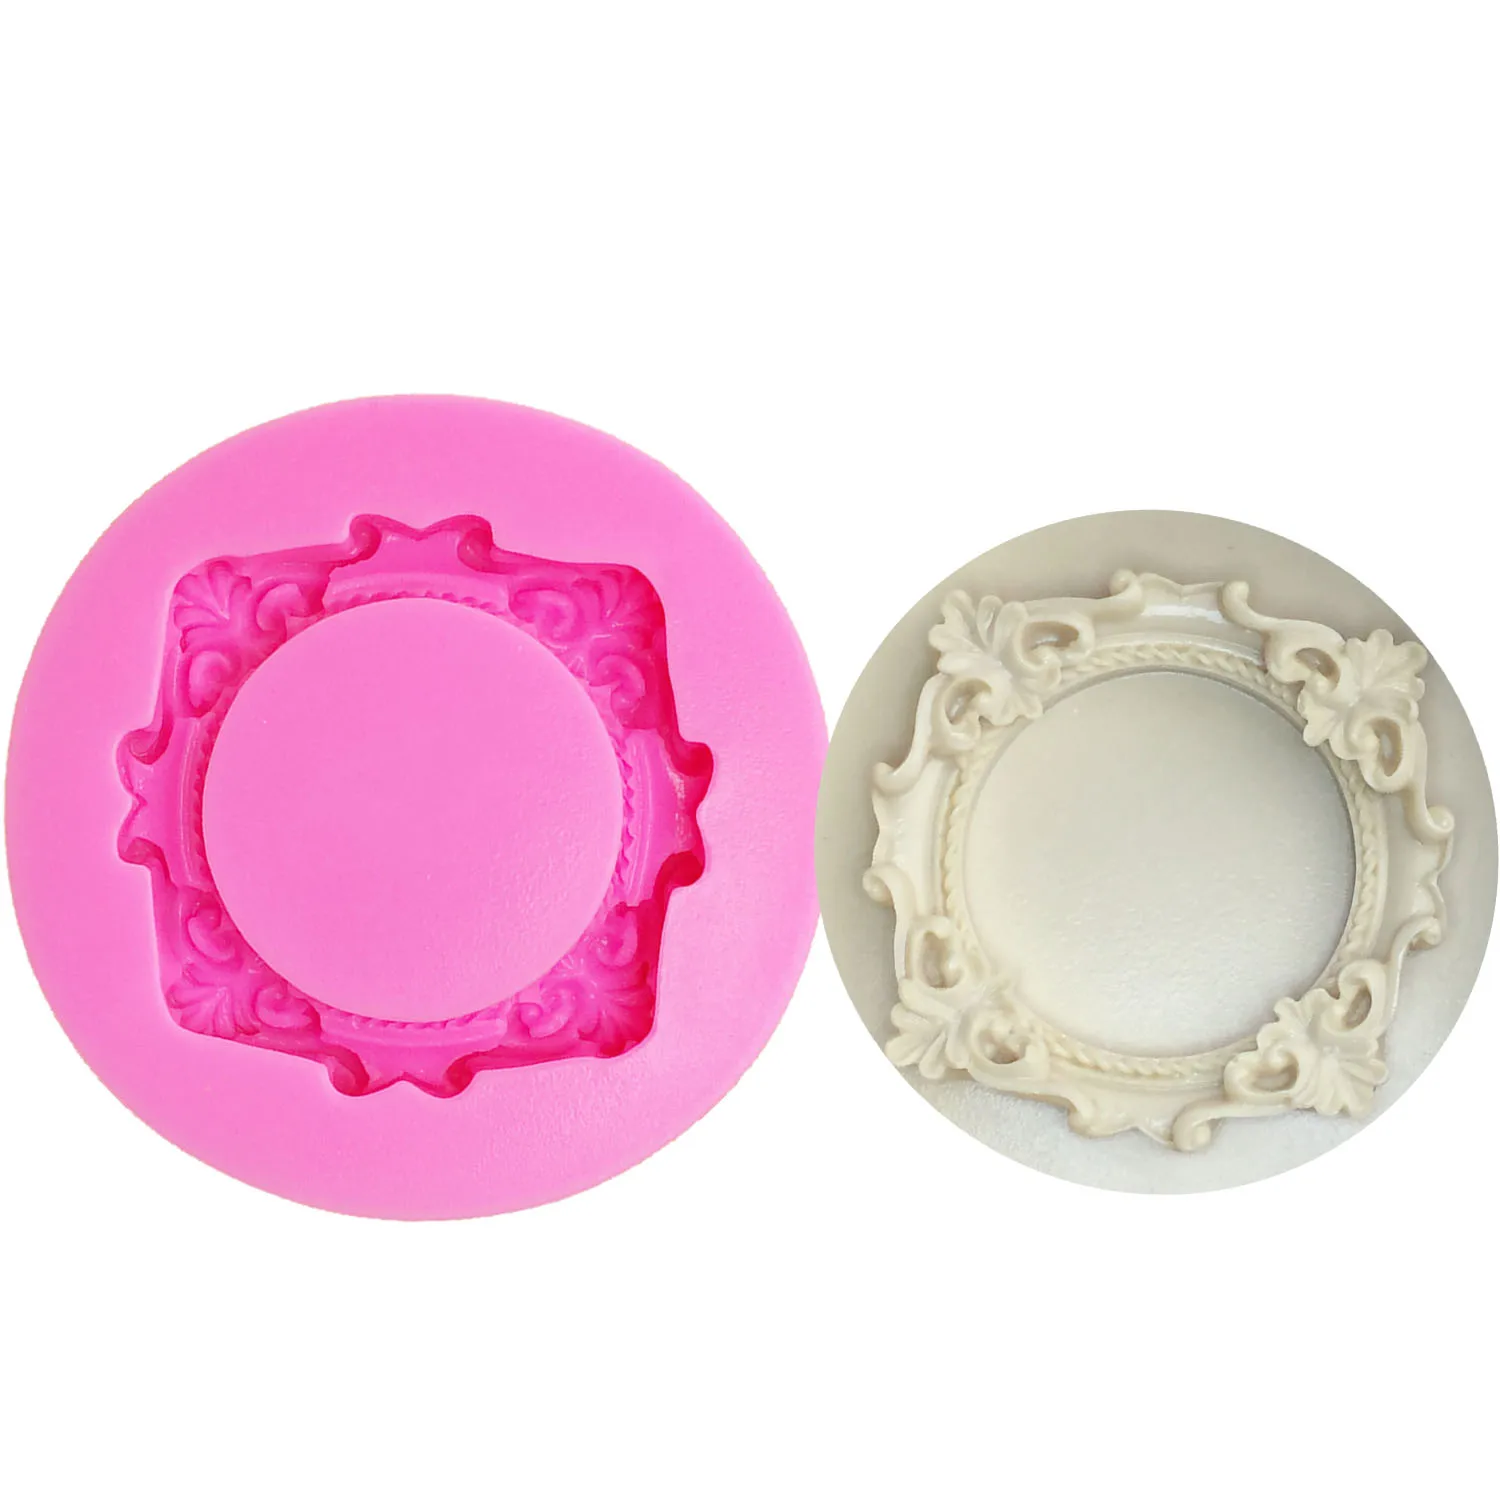 

M1079 Frame cake Decorating Fondant Cake Silicone Mold Candy Biscuits Molds Chocolate Cake Mould DIY Kitchen Baking Tools